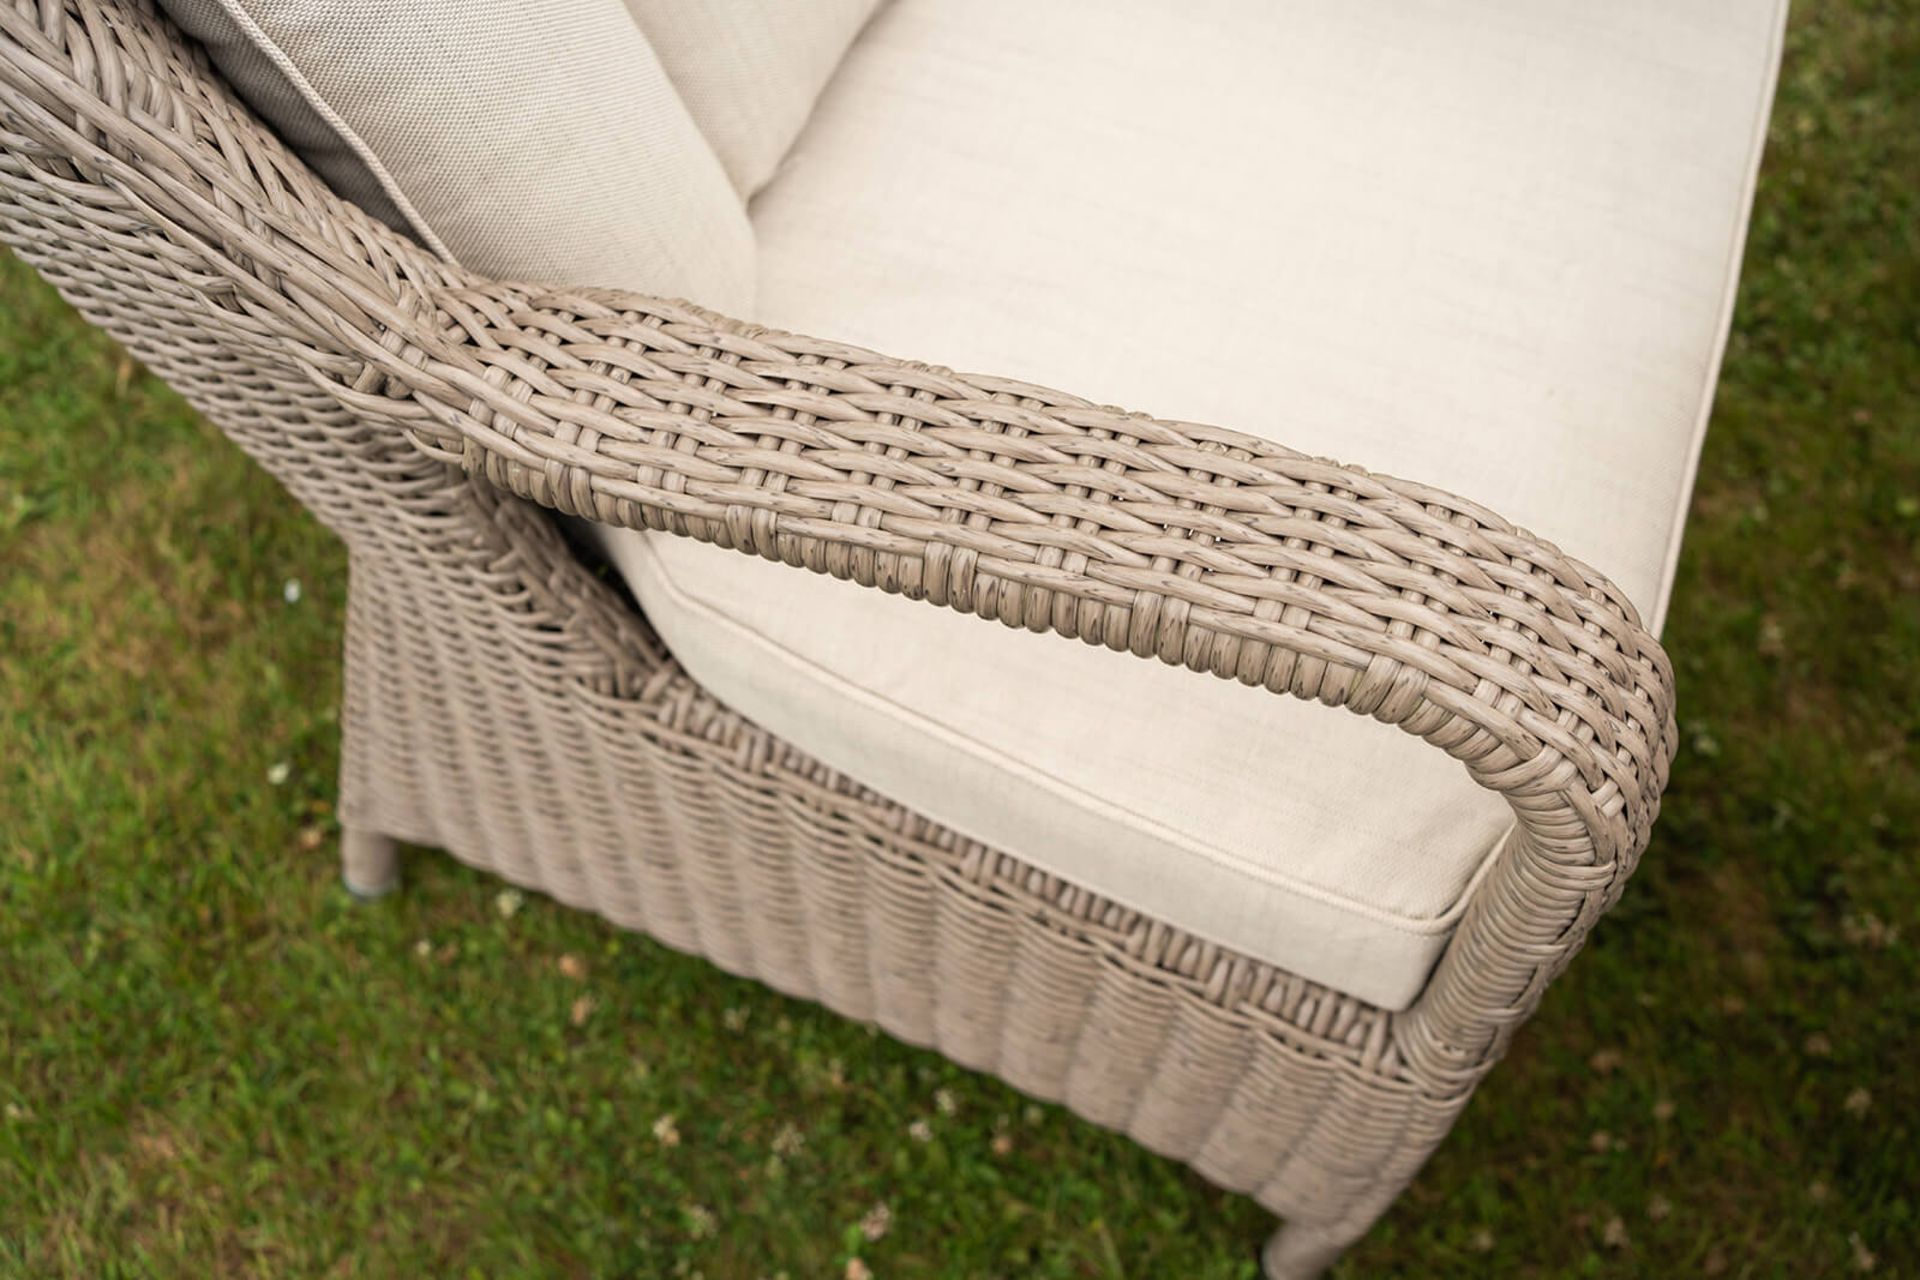 Brand New Moda Furniture 6 Seater Oval Outdoor Dining Set in Natural With Cream Cushions. RRP £ - Image 2 of 5